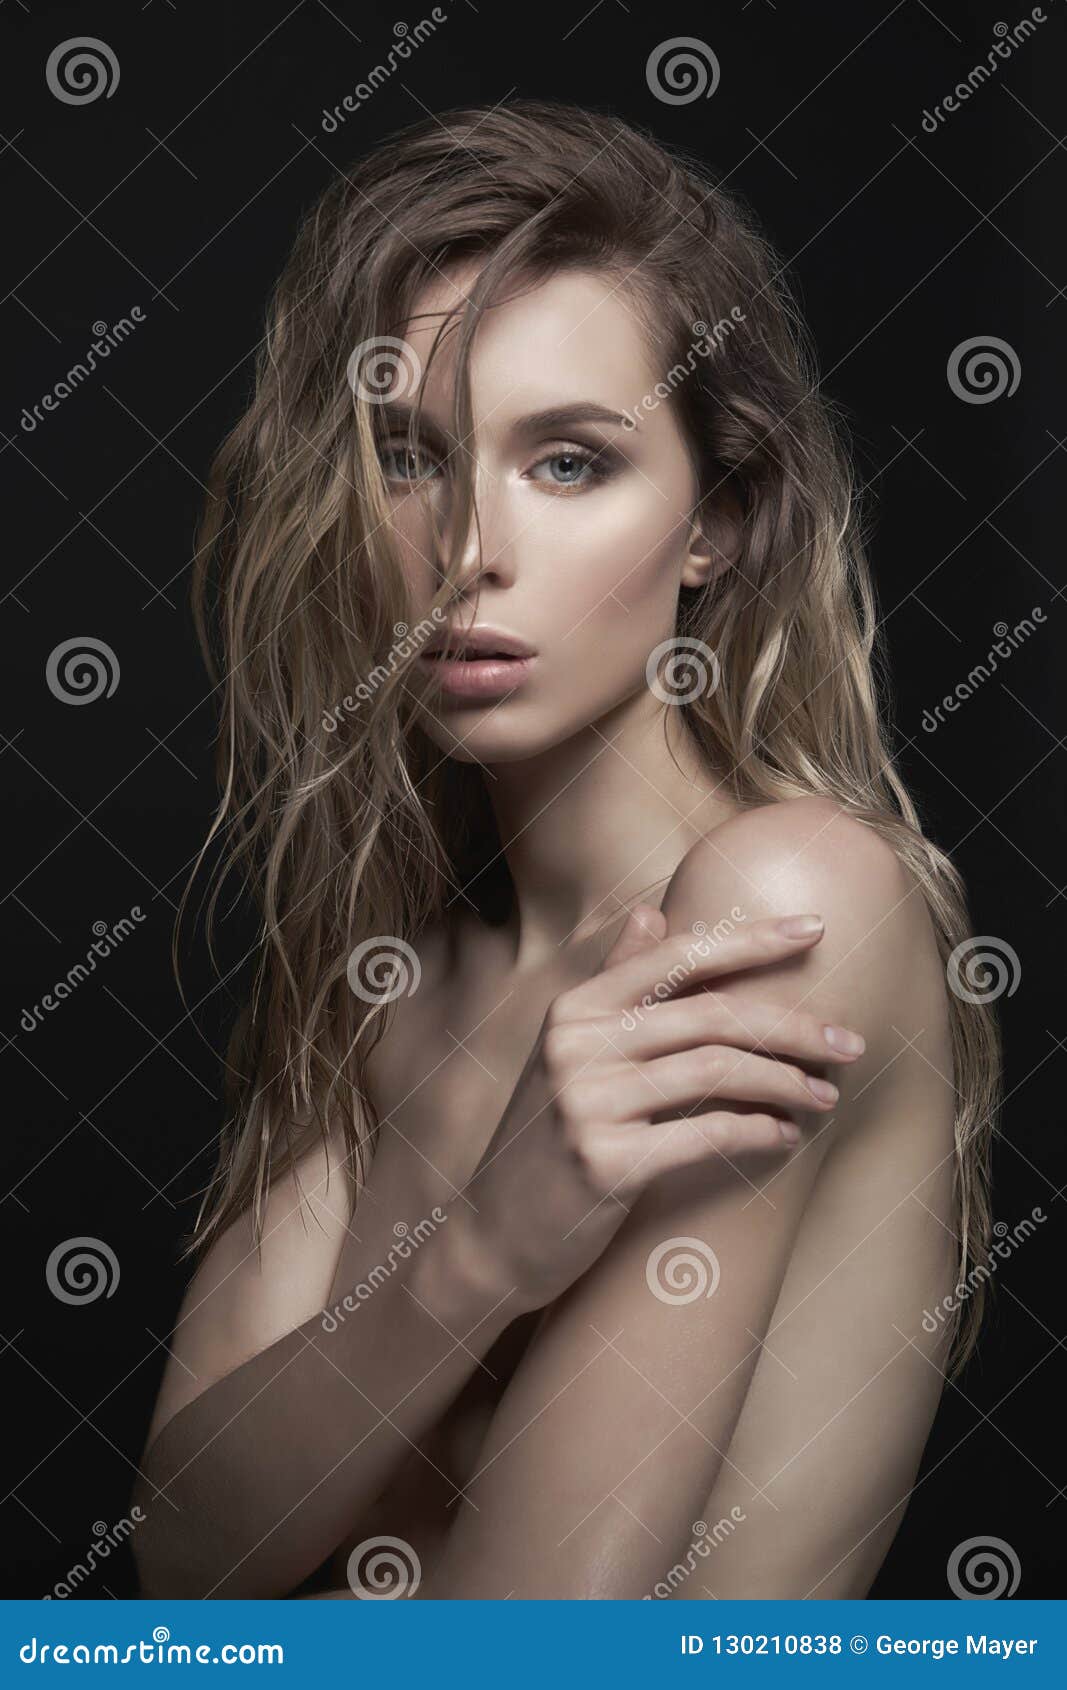 Young Beautiful Blonde with Body Stock Photo pic